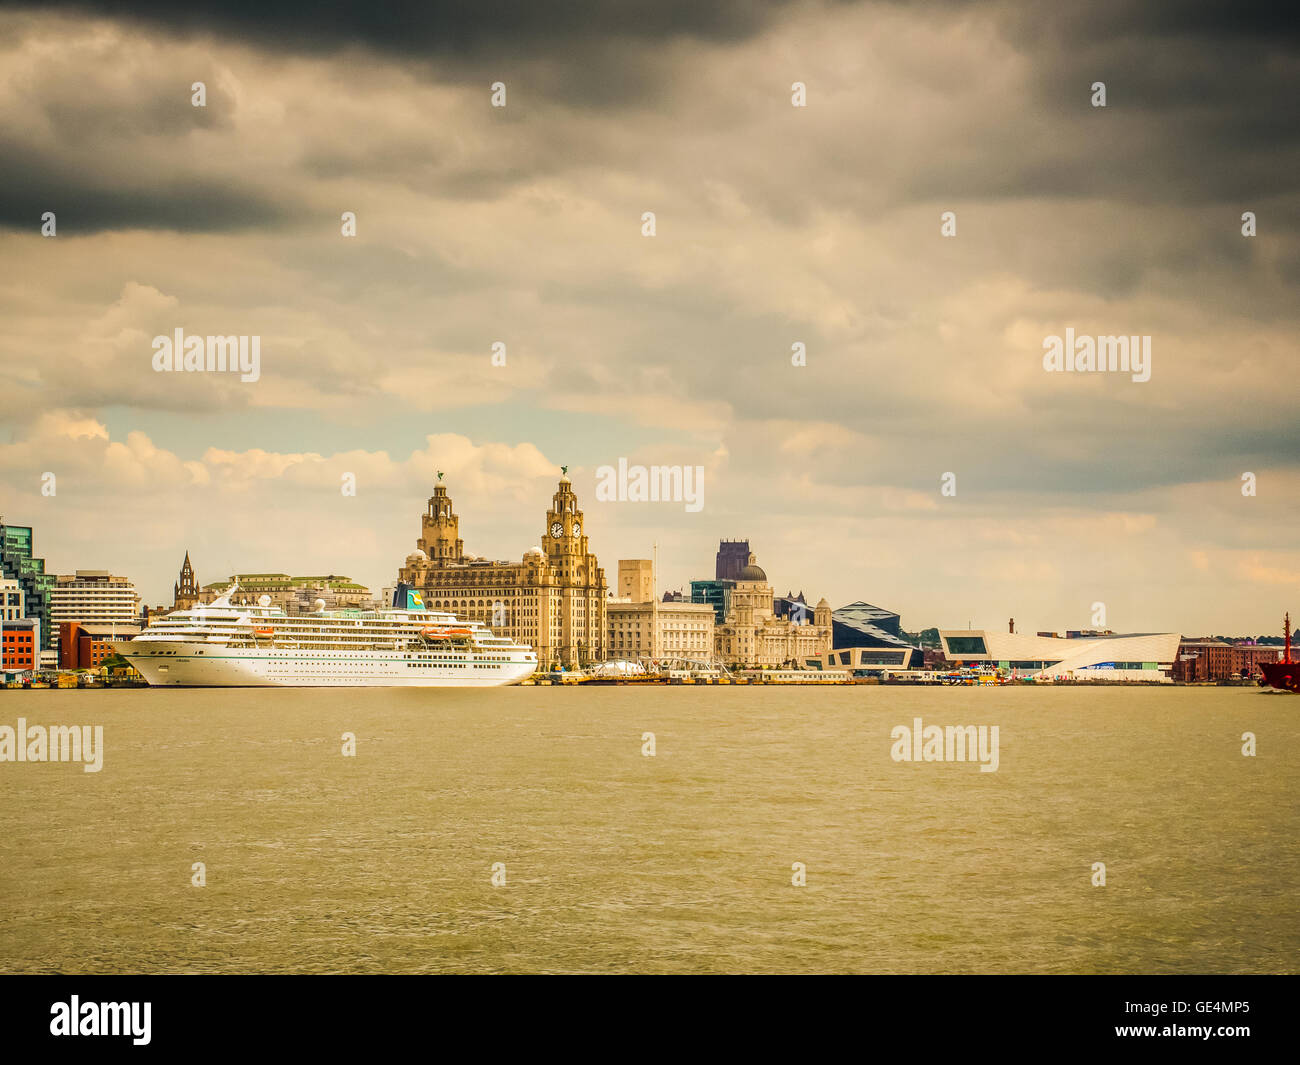 Panorama of Liverpool Waterfront with Cruise Ship Stock Photo